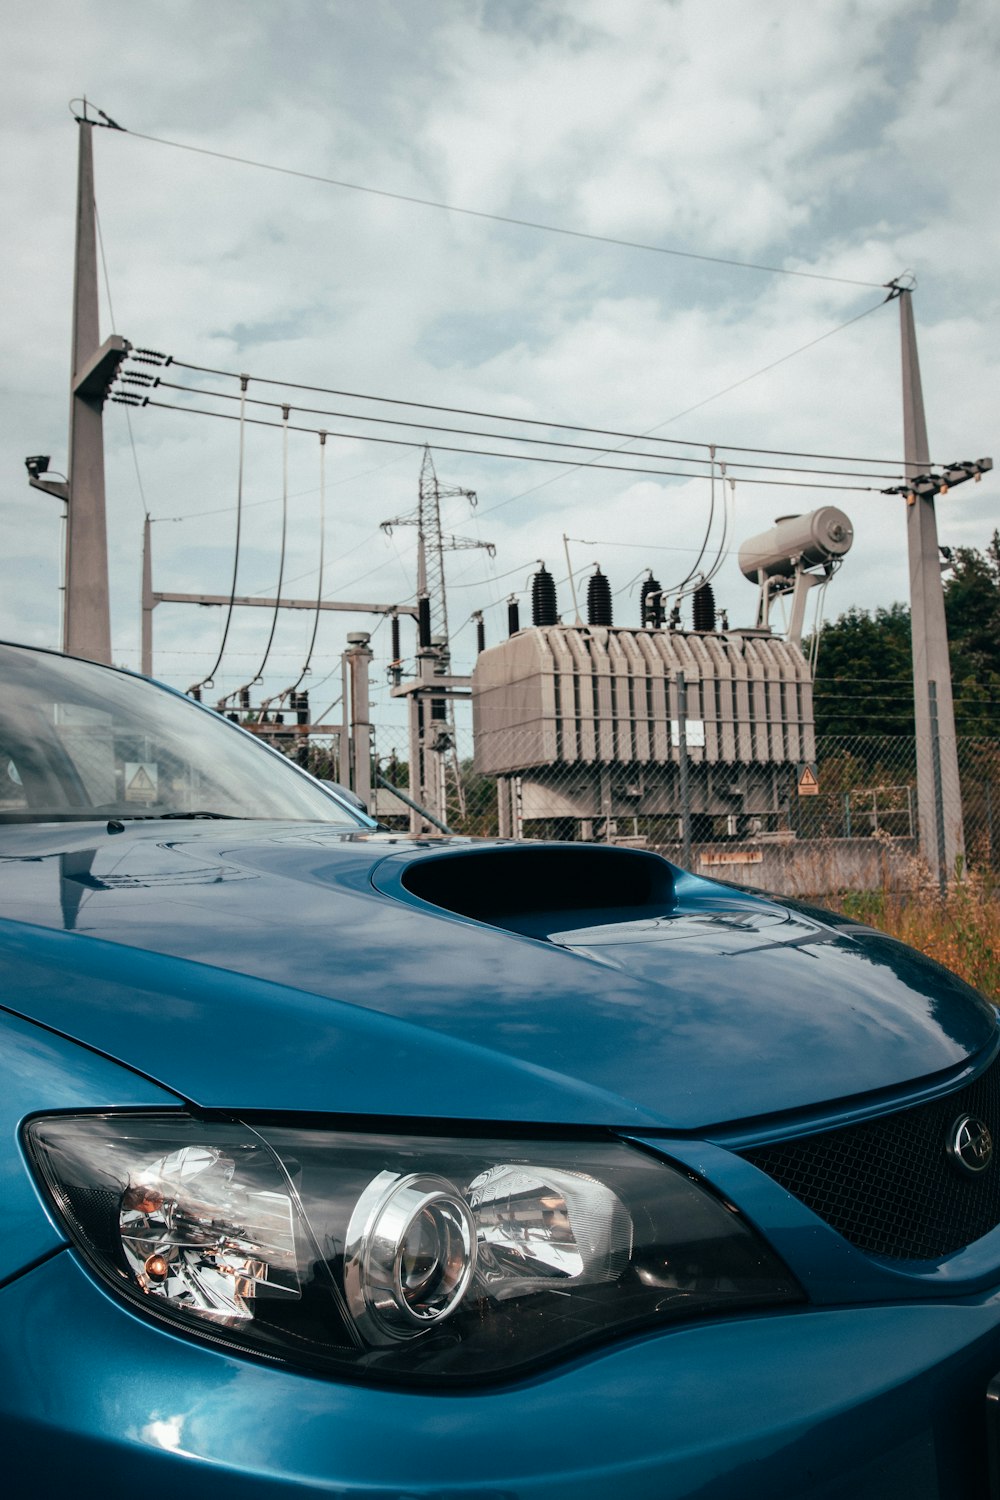 a blue car parked in front of a power line